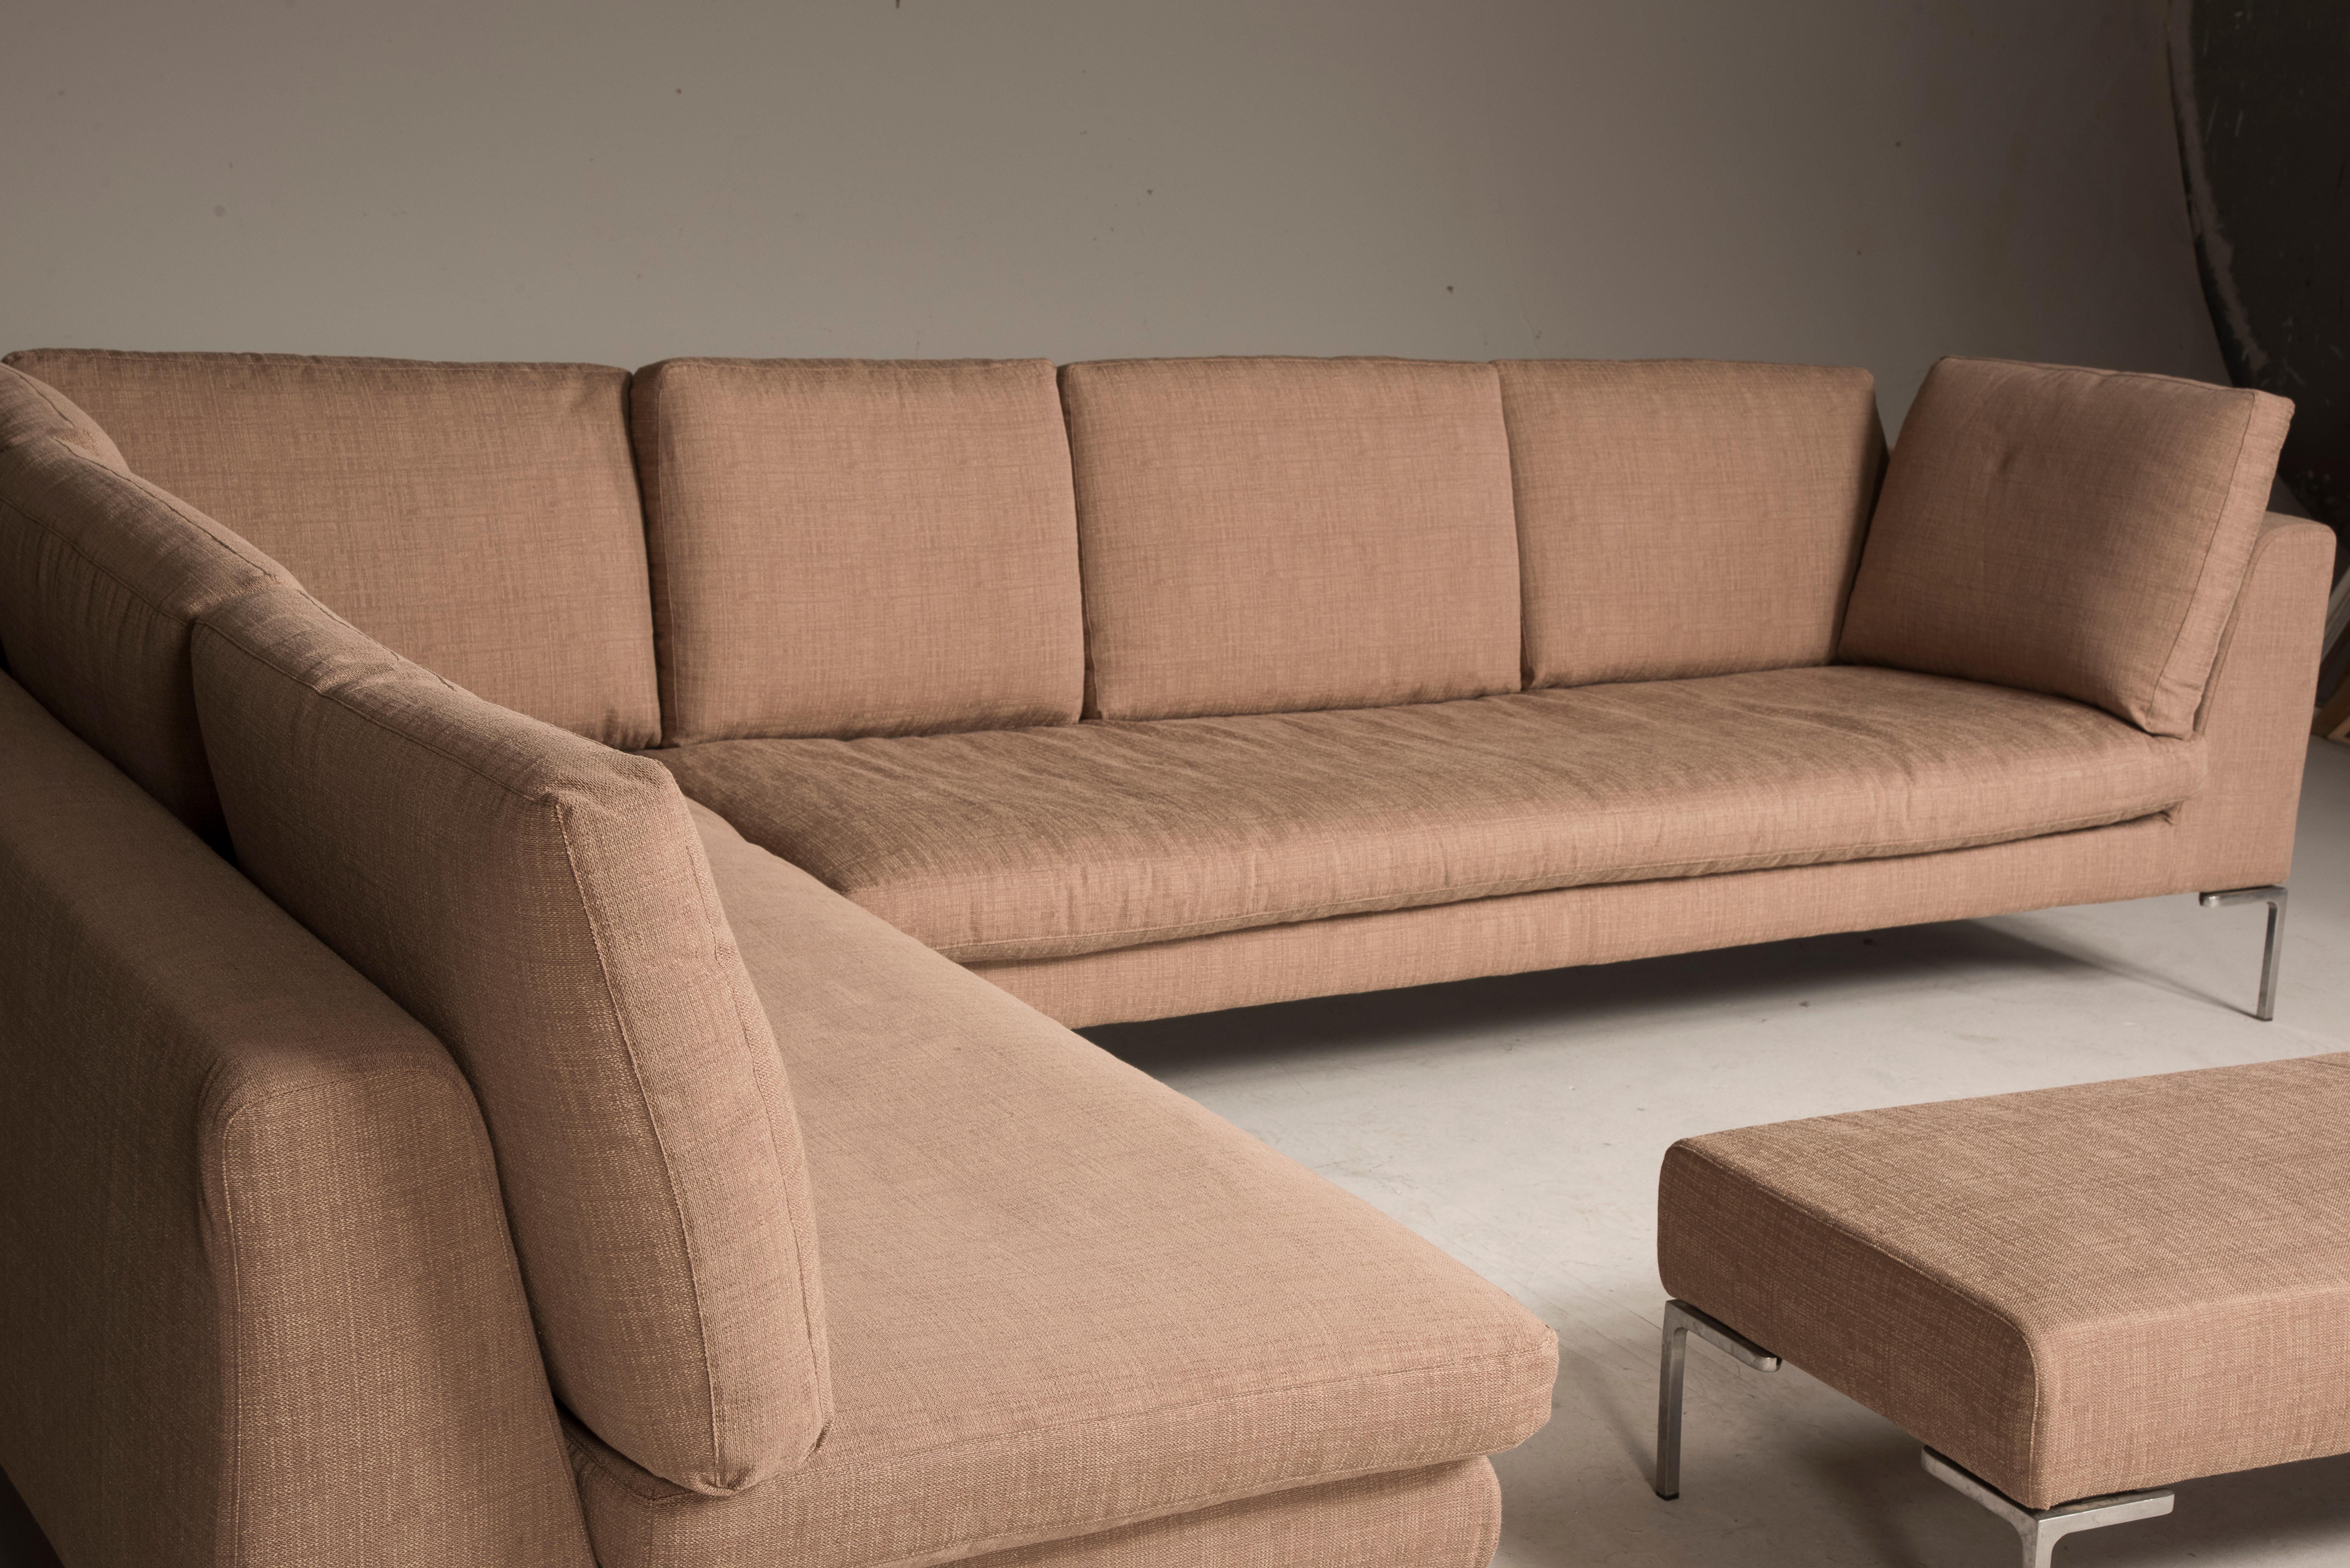 Late 20th Century Charles Model by Antonio Citterio for B&B Italia Beige Color Sofà and Bench Set